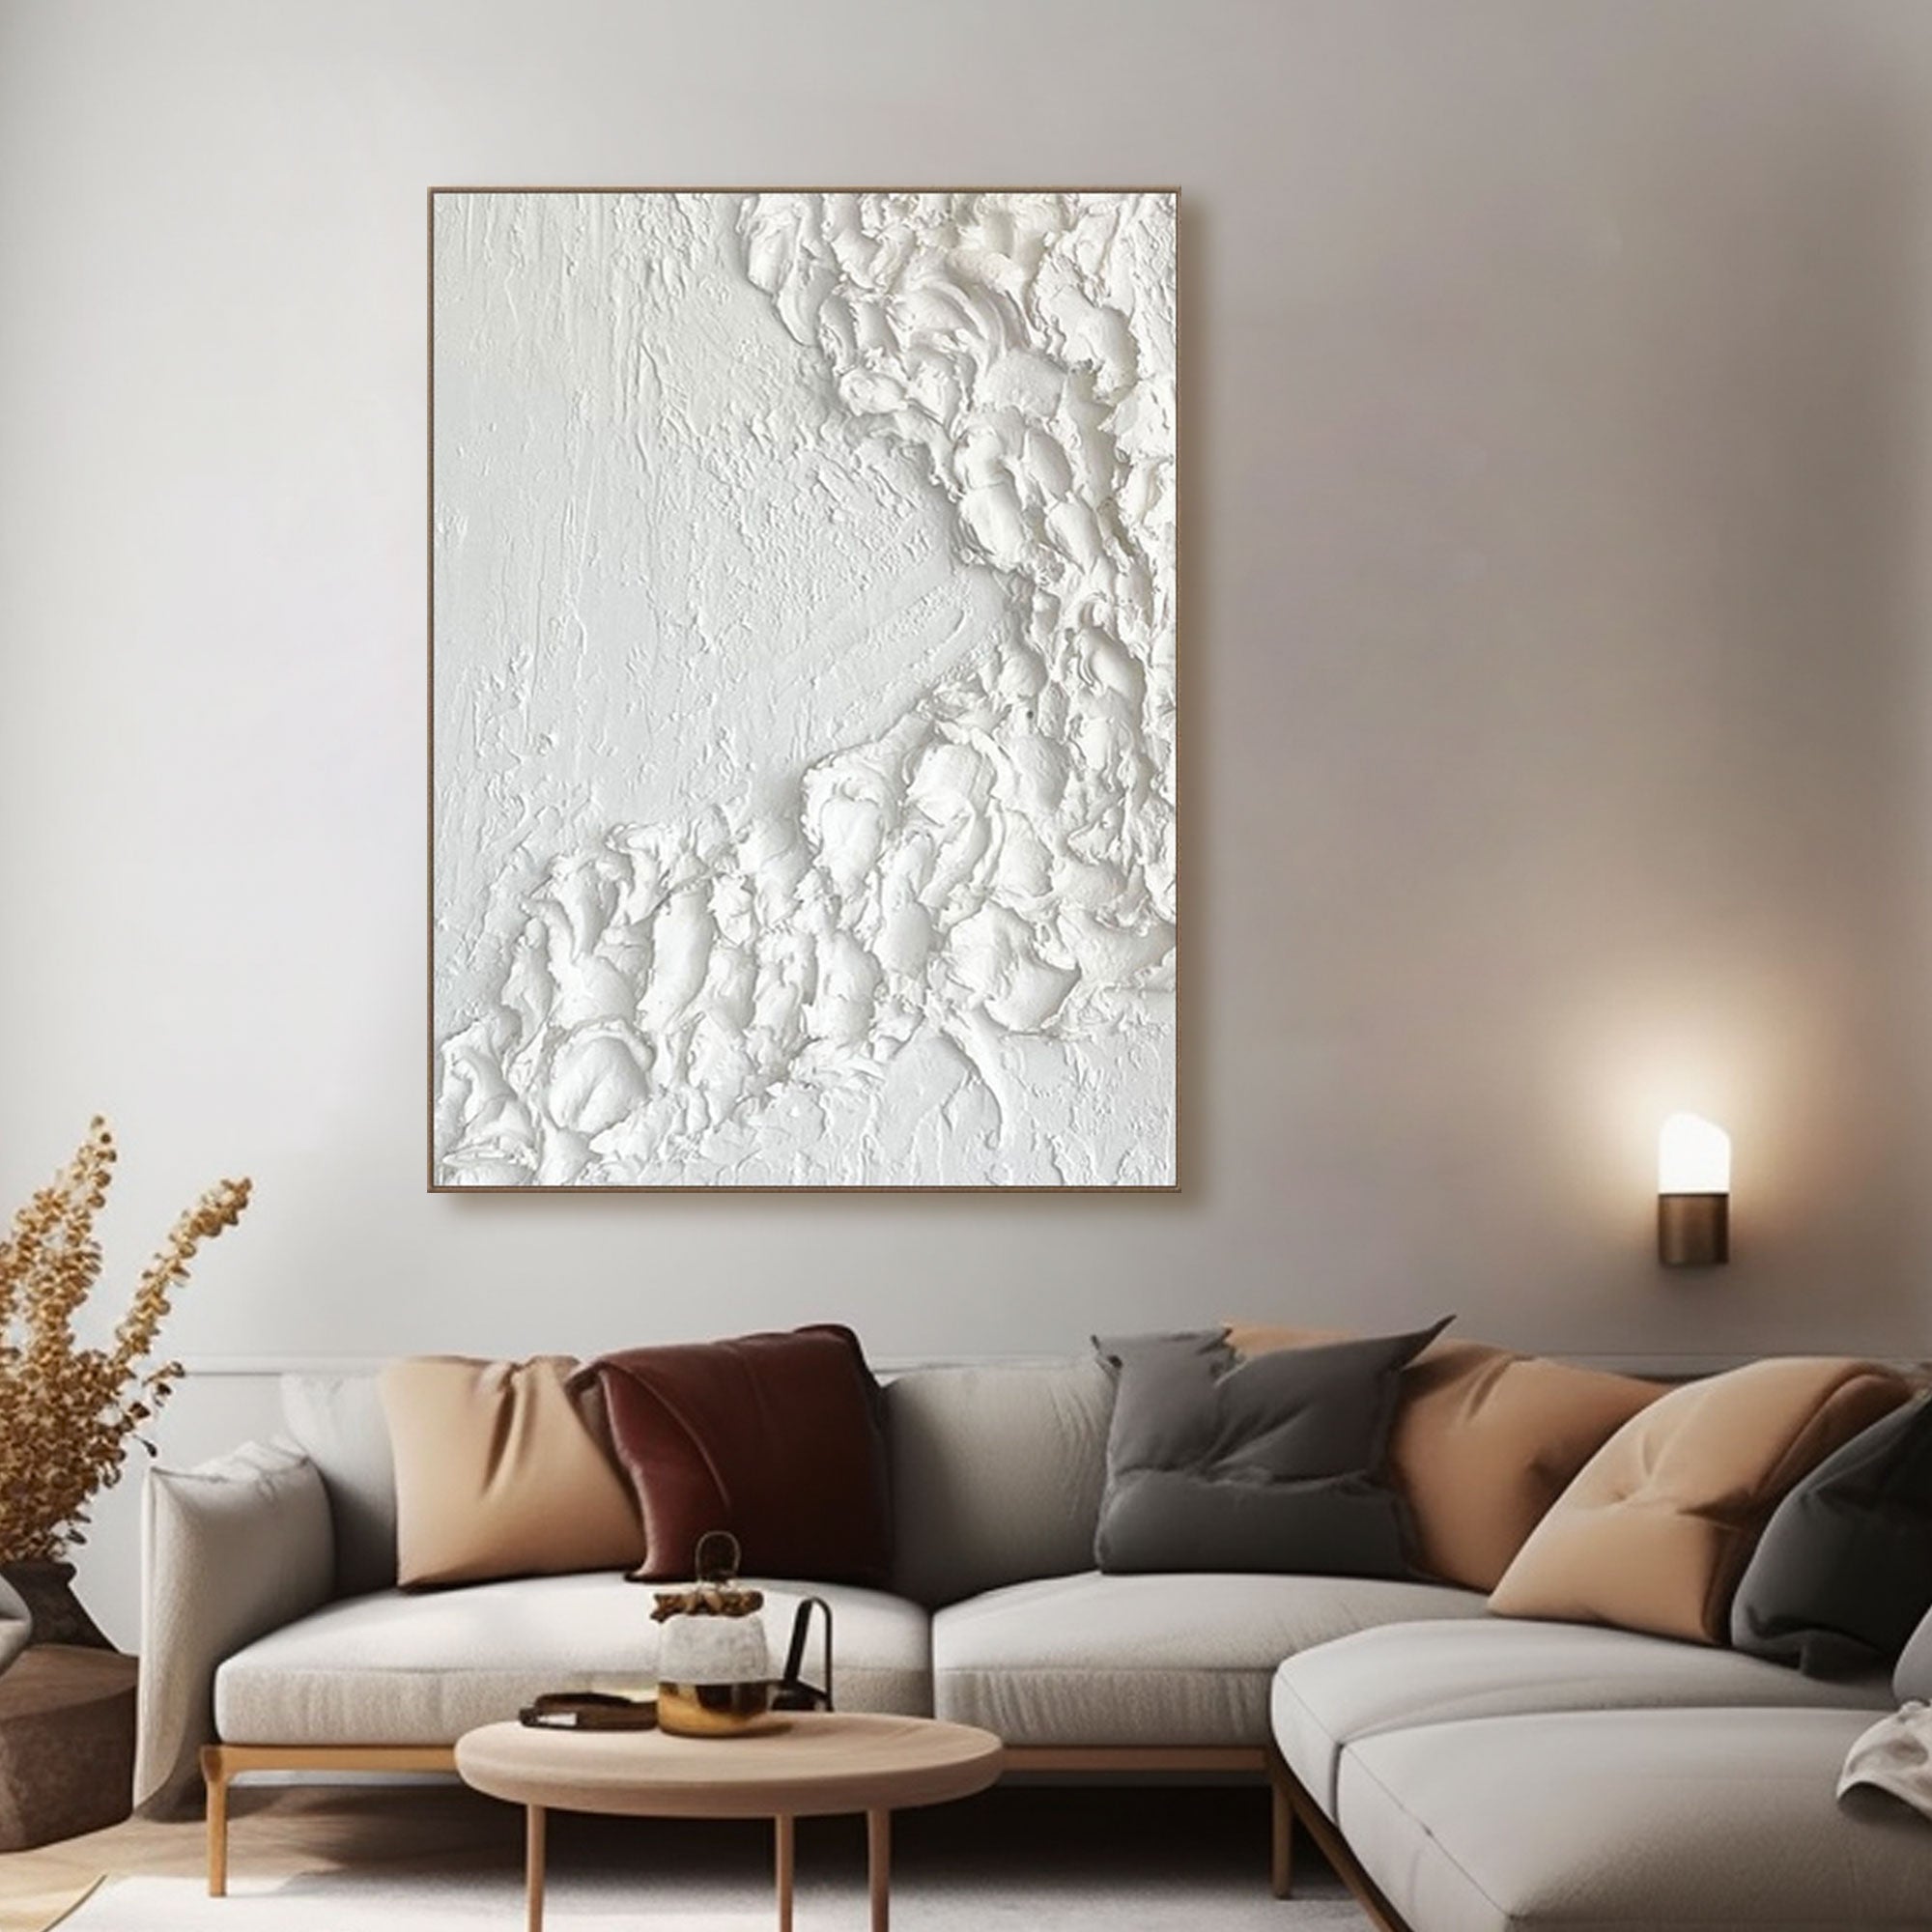 Minimalist White and Gray Painting "Winter's Embrace"